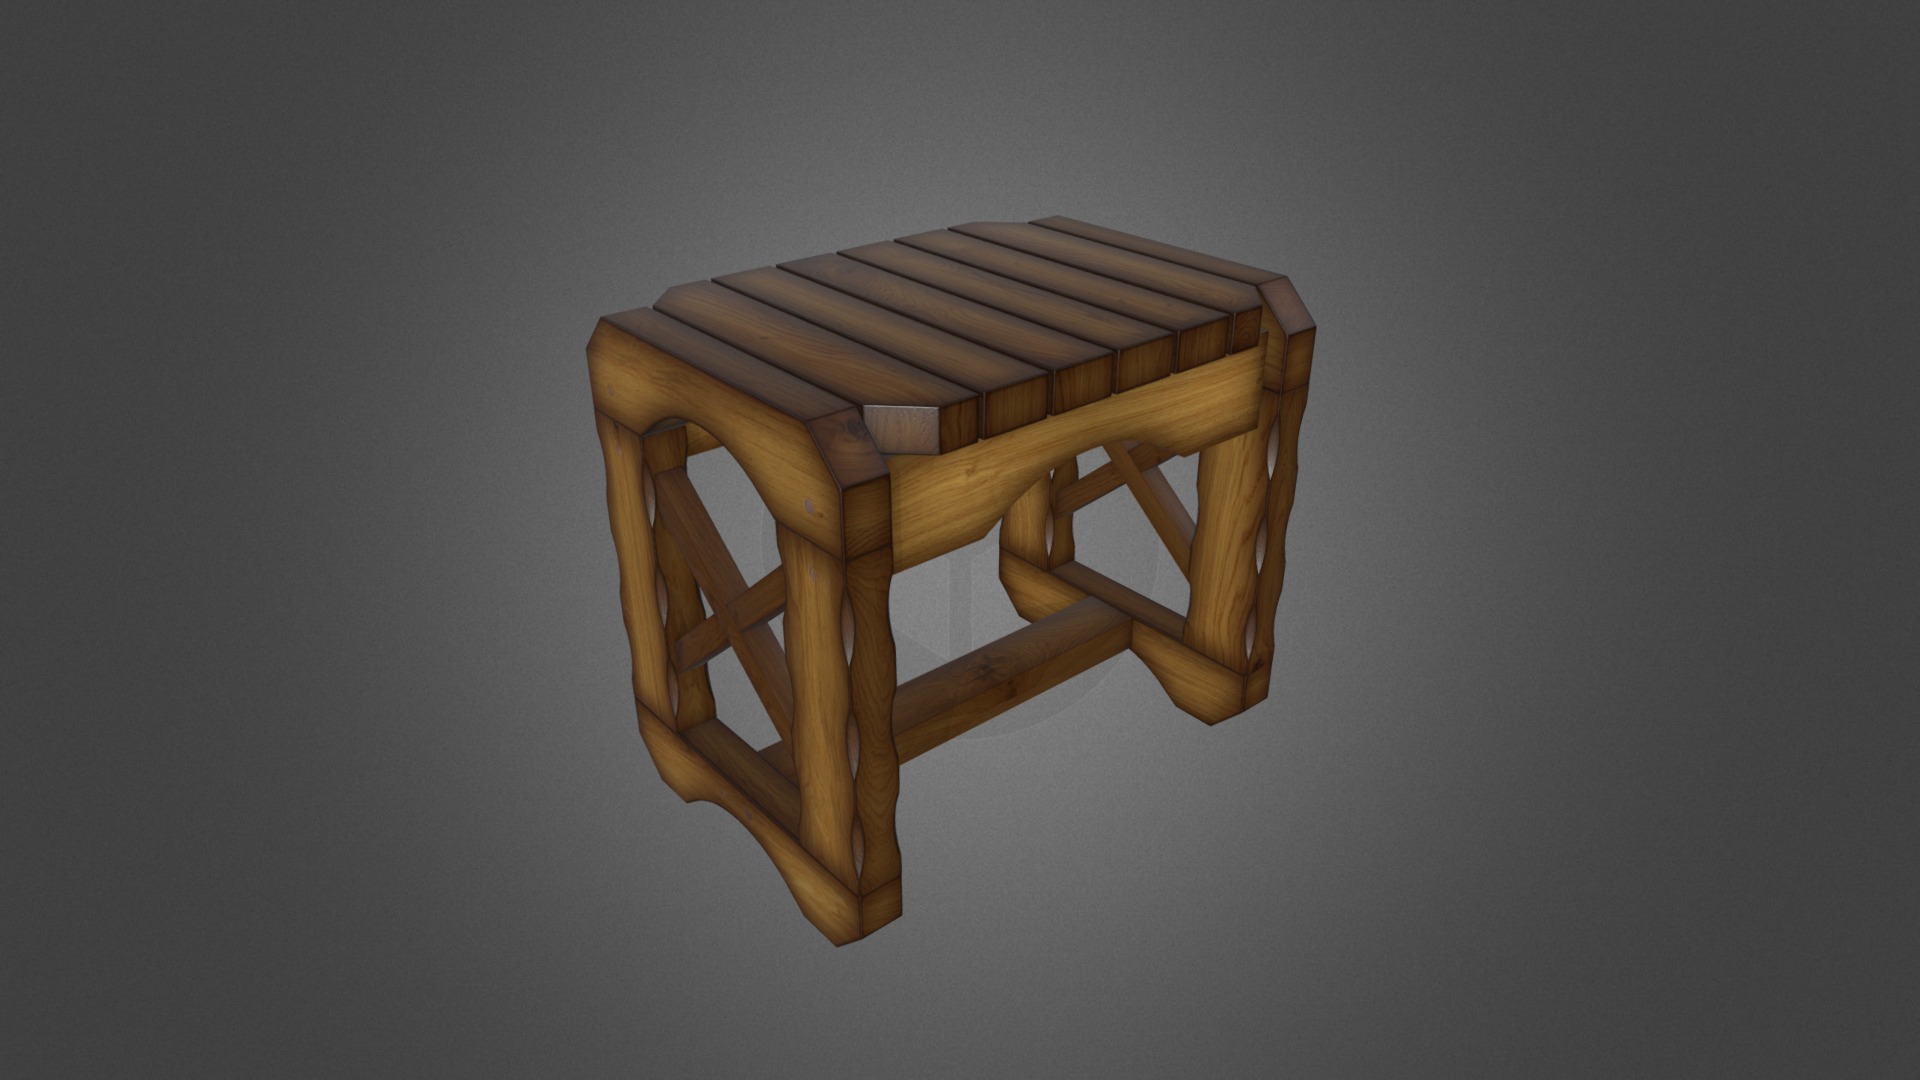 3D model stool bench - This is a 3D model of the stool bench. The 3D model is about a wooden chair on a white background.